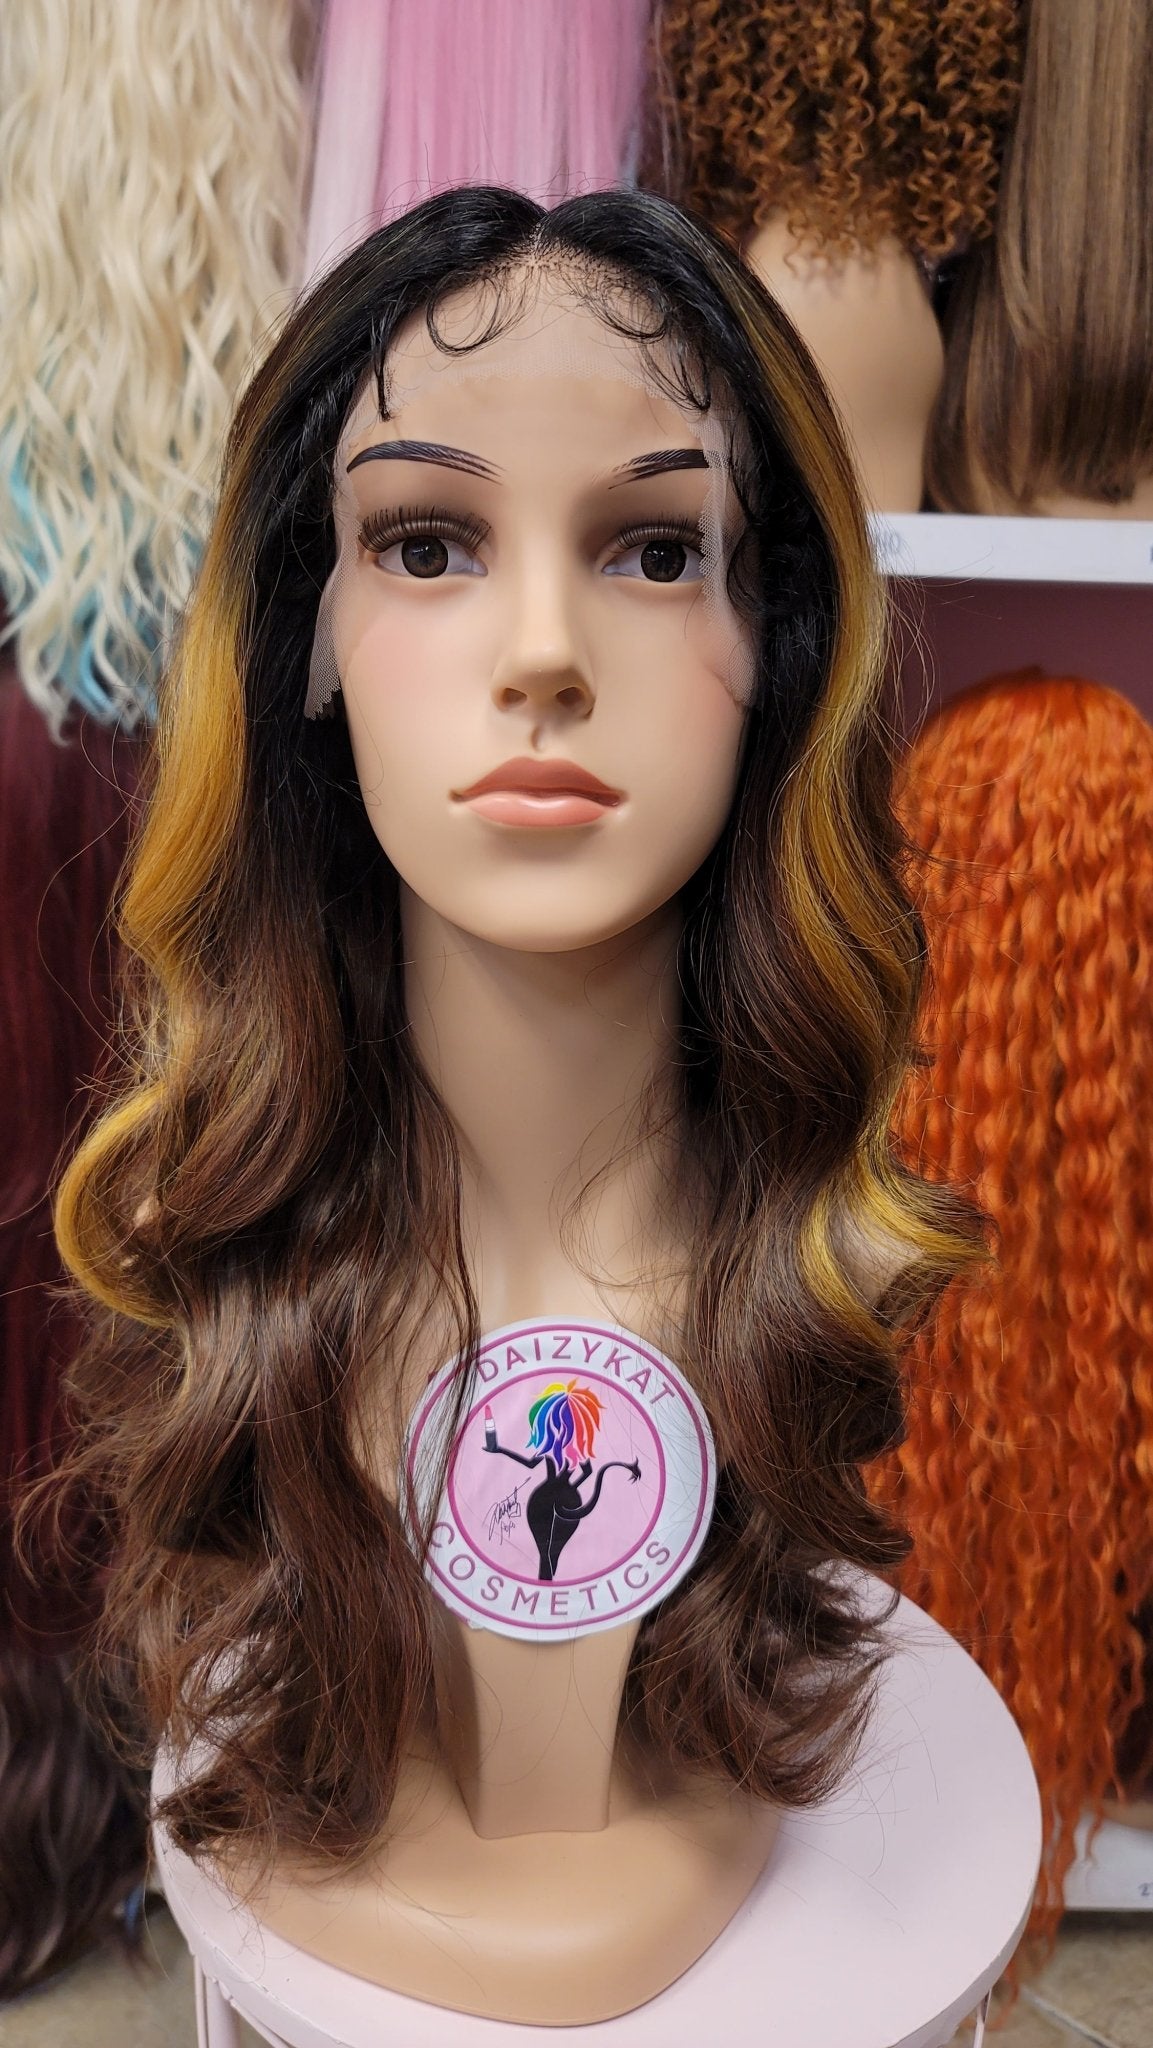 423 Jasmine - Middle Part Lace Front Wig - 1B/274 - DaizyKat Cosmetics 423 Jasmine - Middle Part Lace Front Wig - 1B/274 DaizyKat Cosmetics Wigs